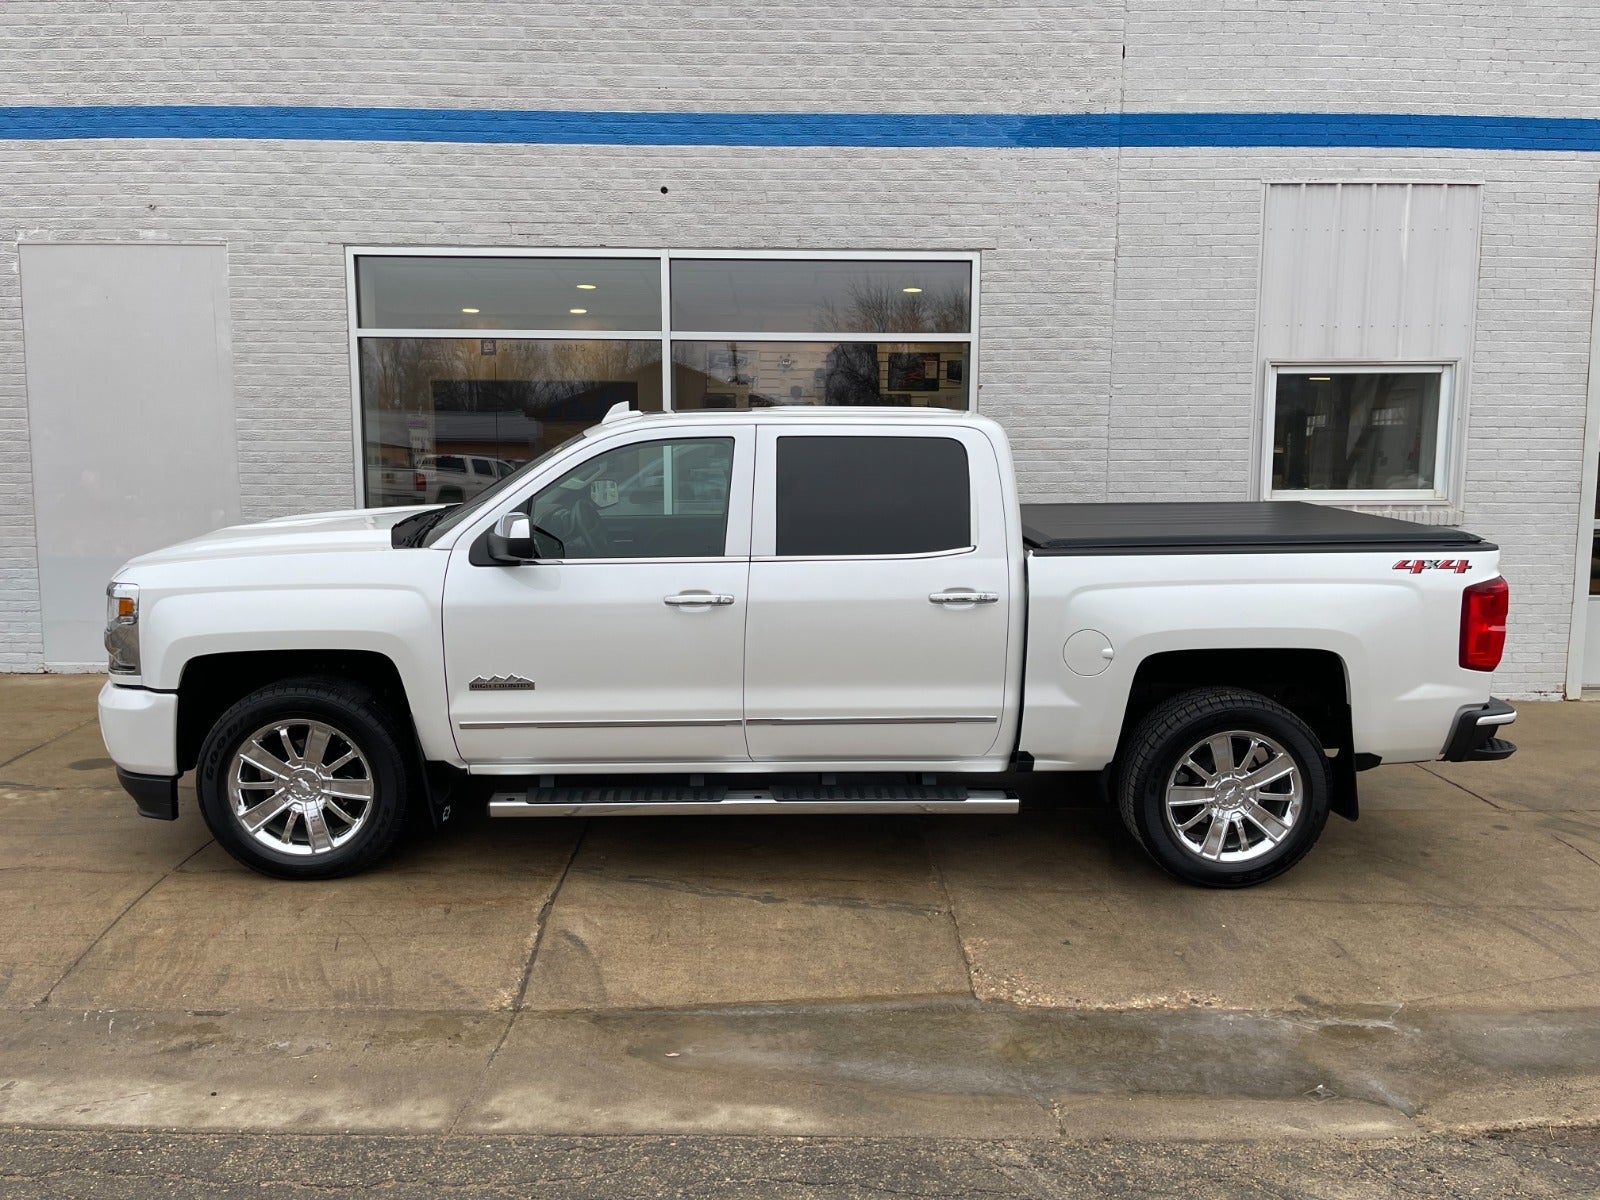 Used 2018 Chevrolet Silverado 1500 High Country with VIN 3GCUKTEC8JG353776 for sale in Edgerton, Minnesota